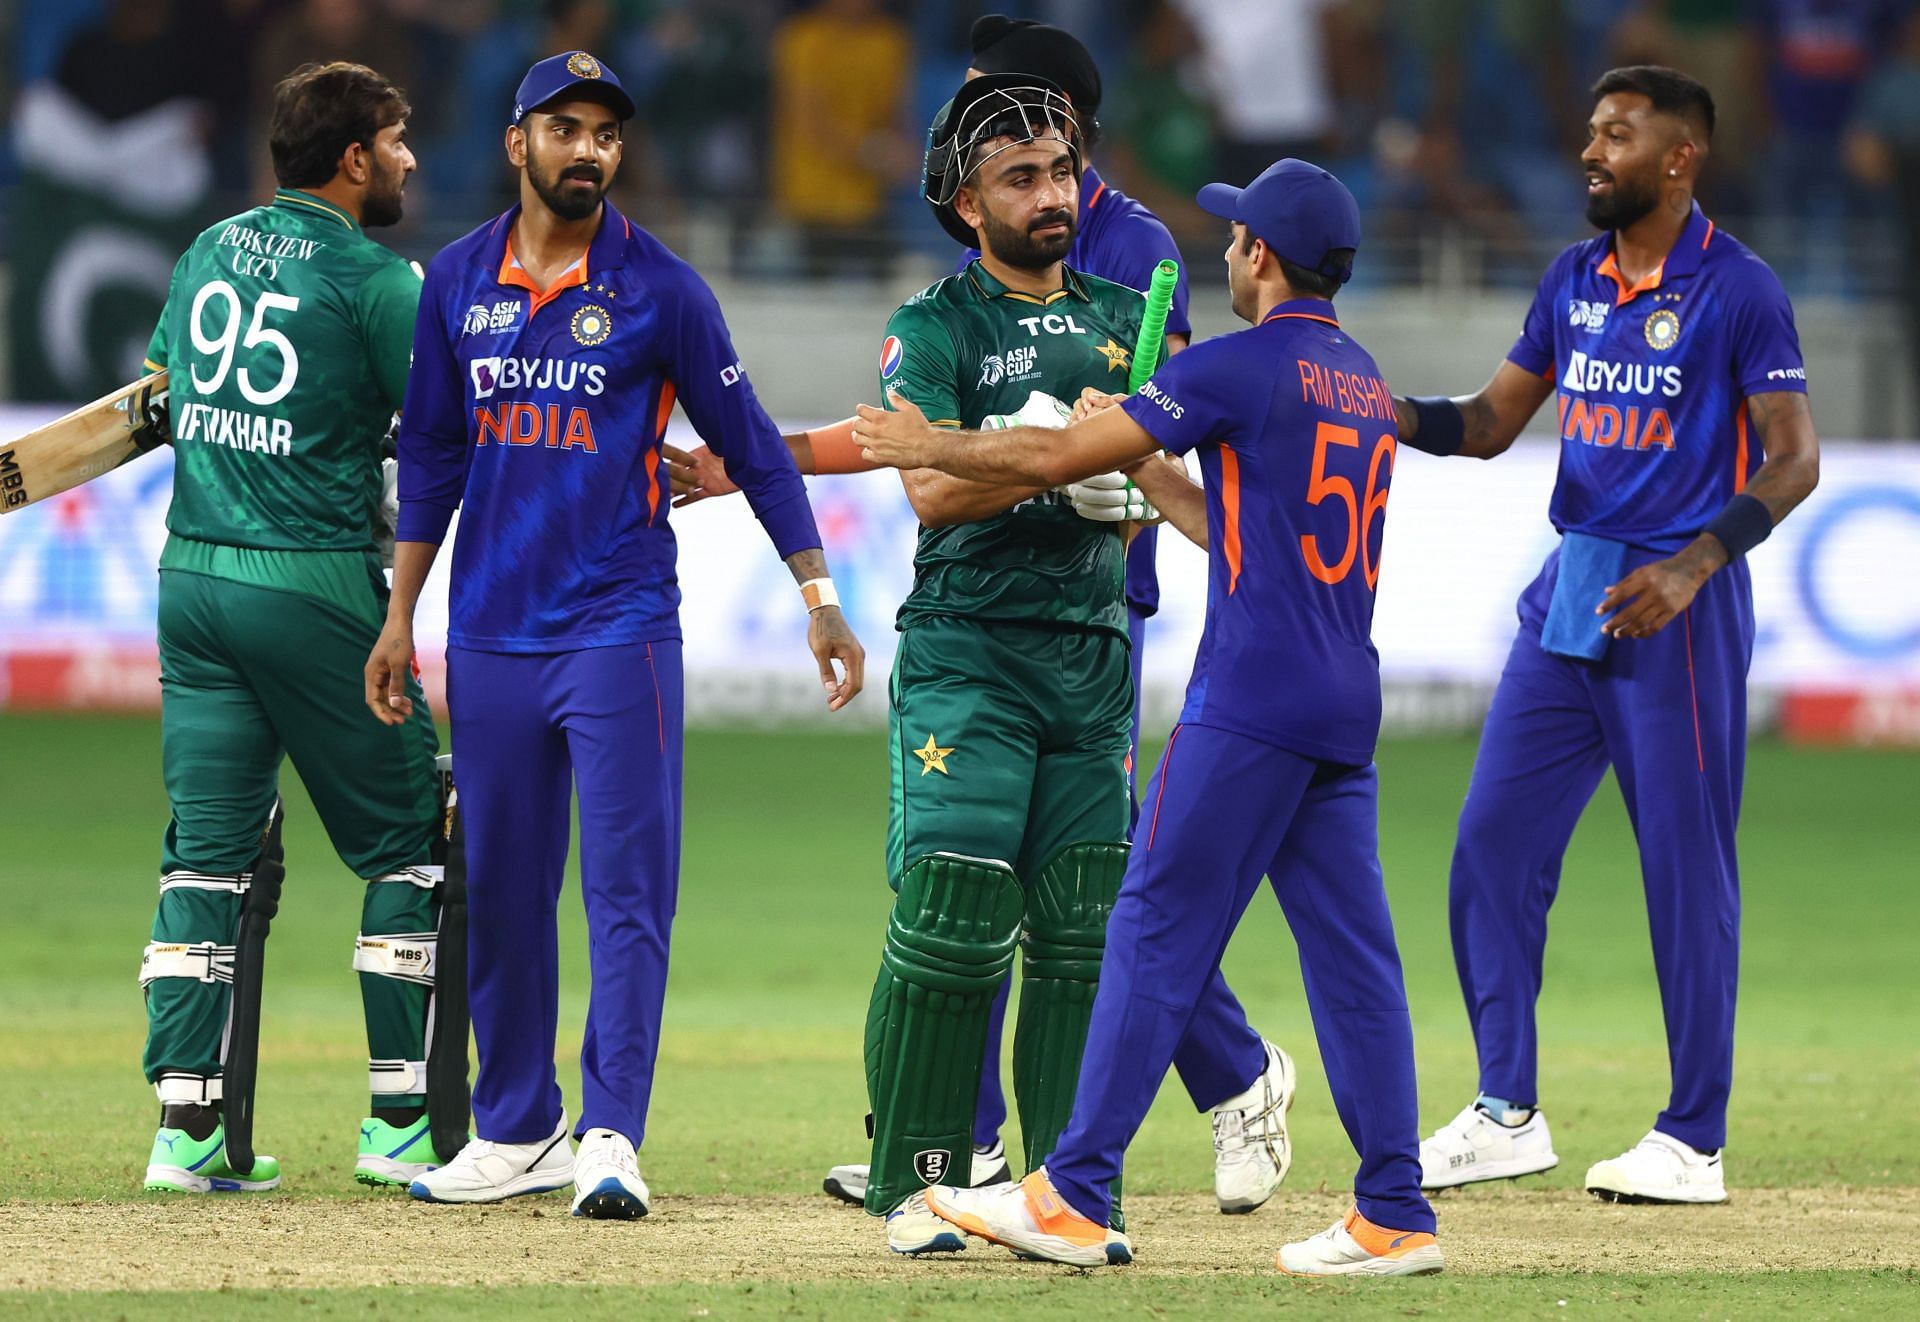 IND vs PAK 2022 When is the India-Pakistan match? Time in IST and venue details